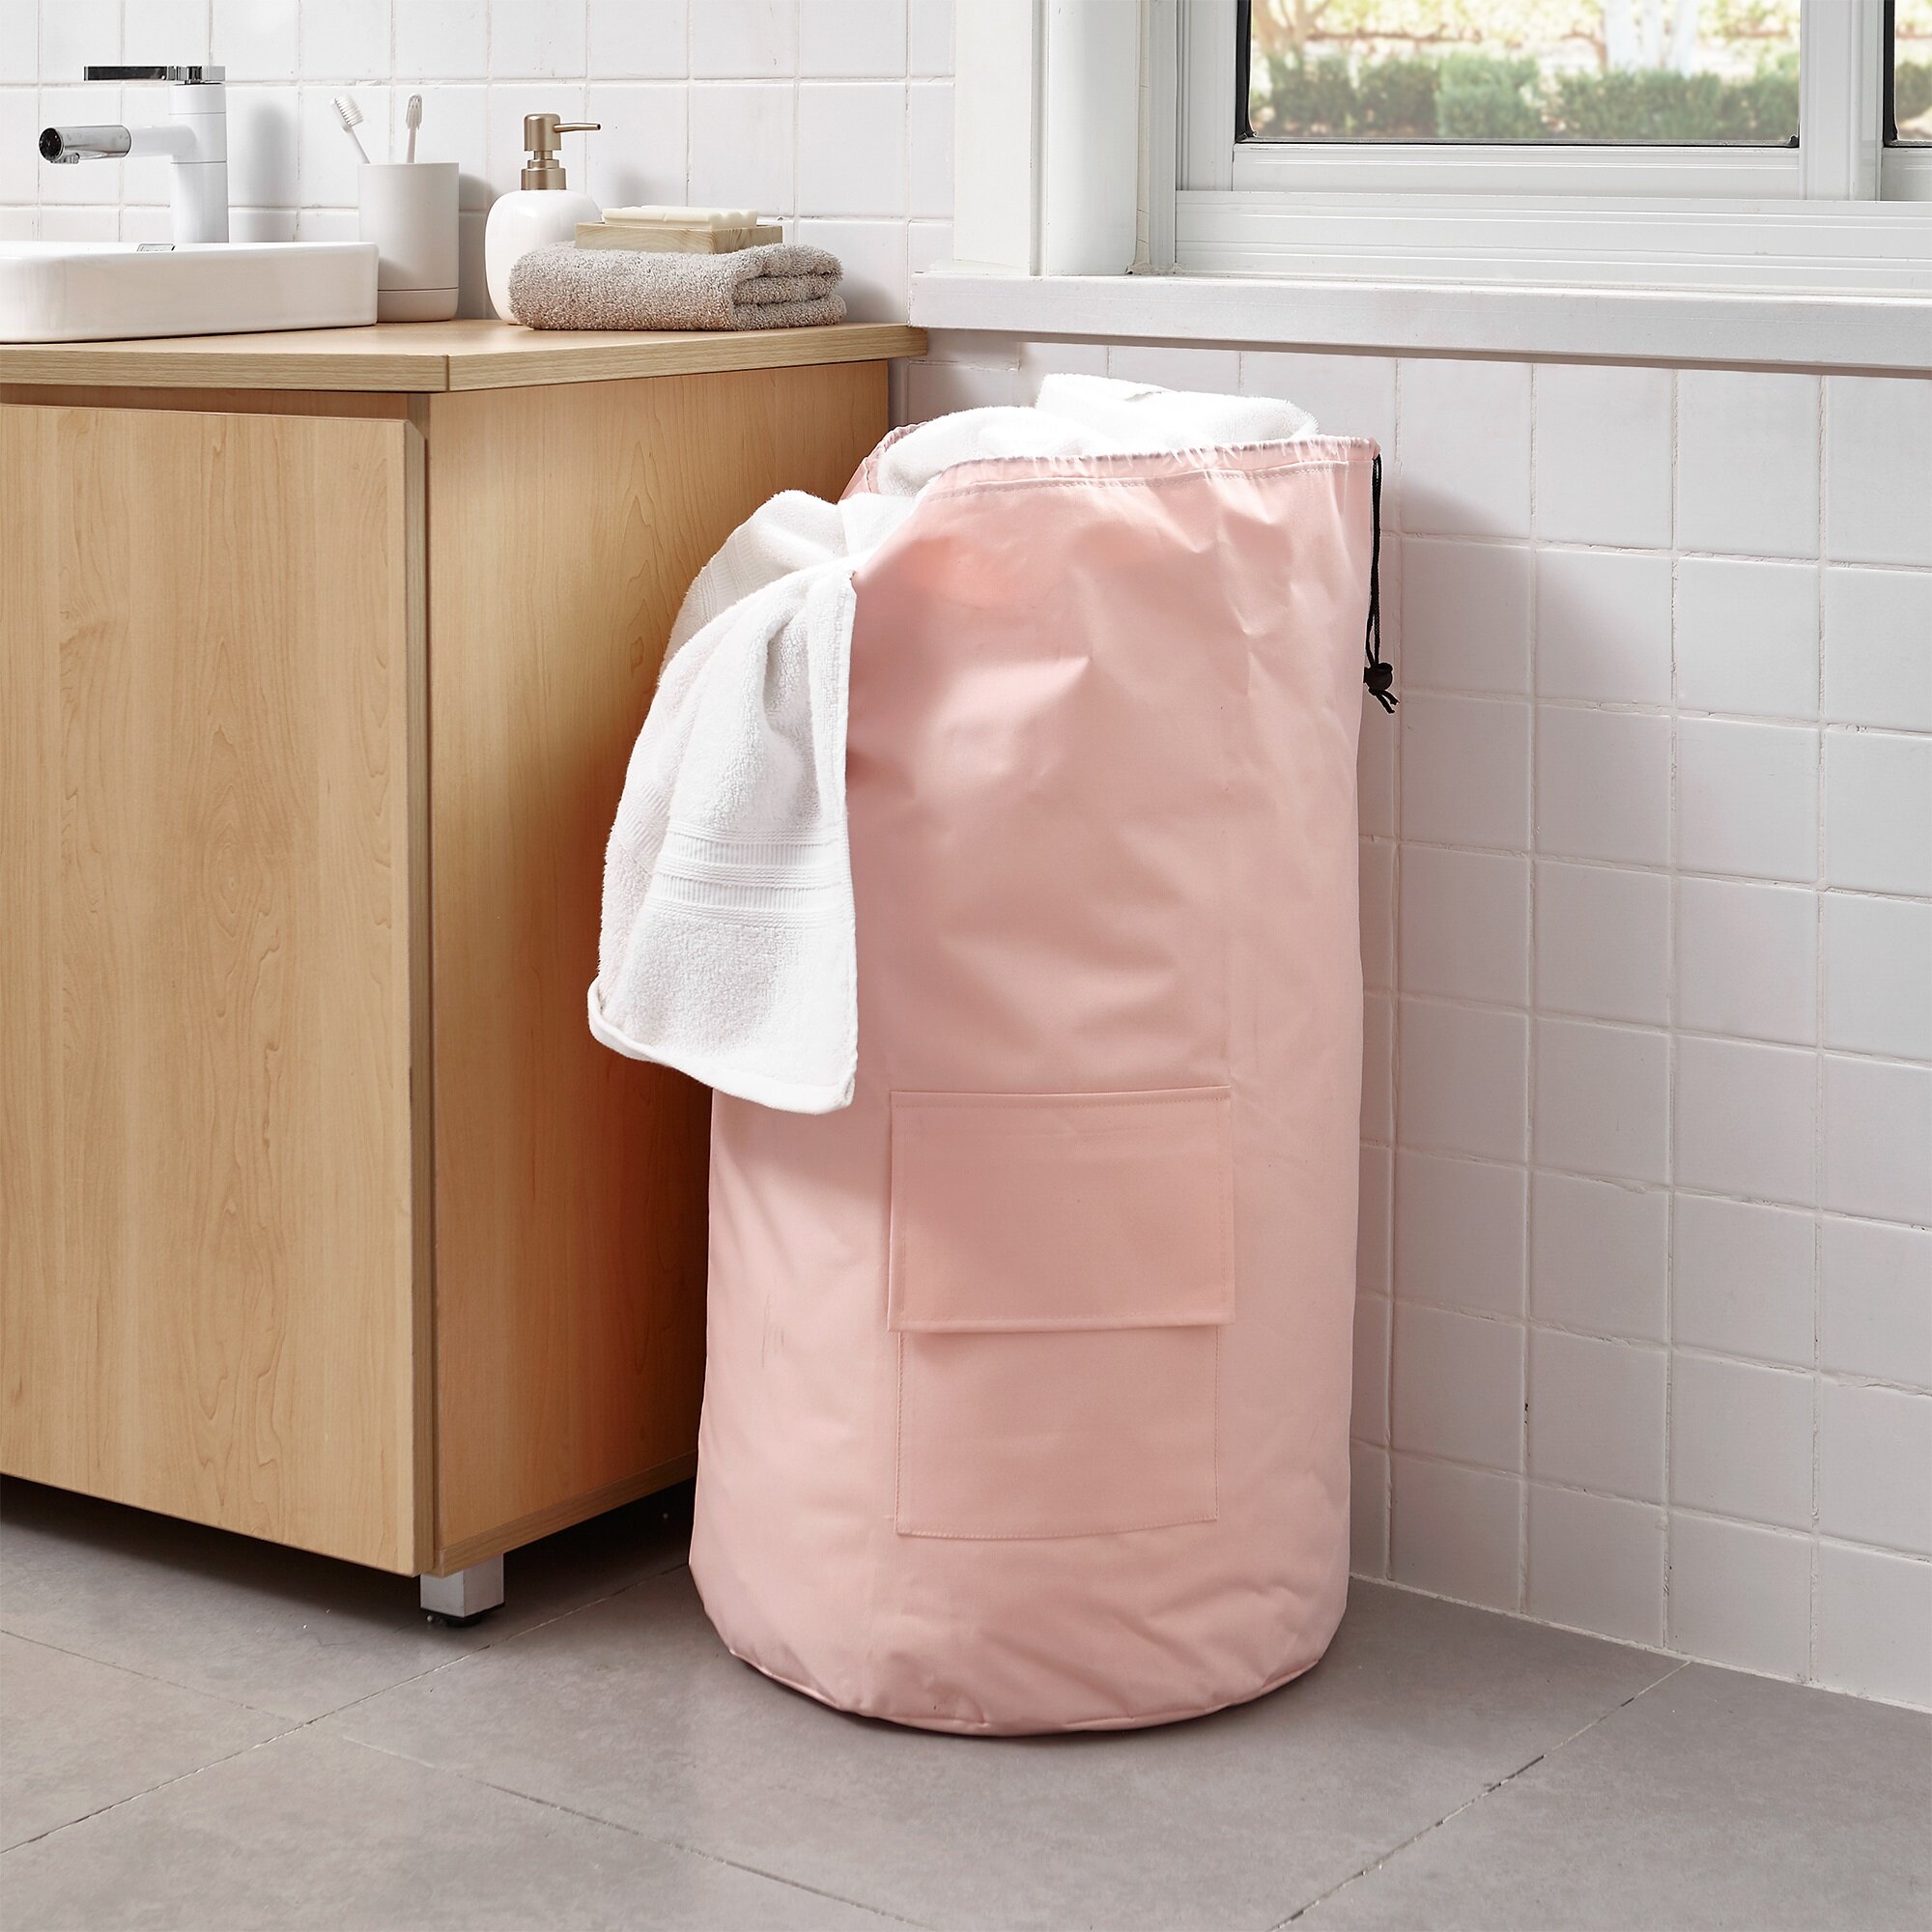 Pink Laundry Backpack - Dorm laundry stuff dorm room laundry supplies  college laundry bags dorm items stuff for college dorm rooms